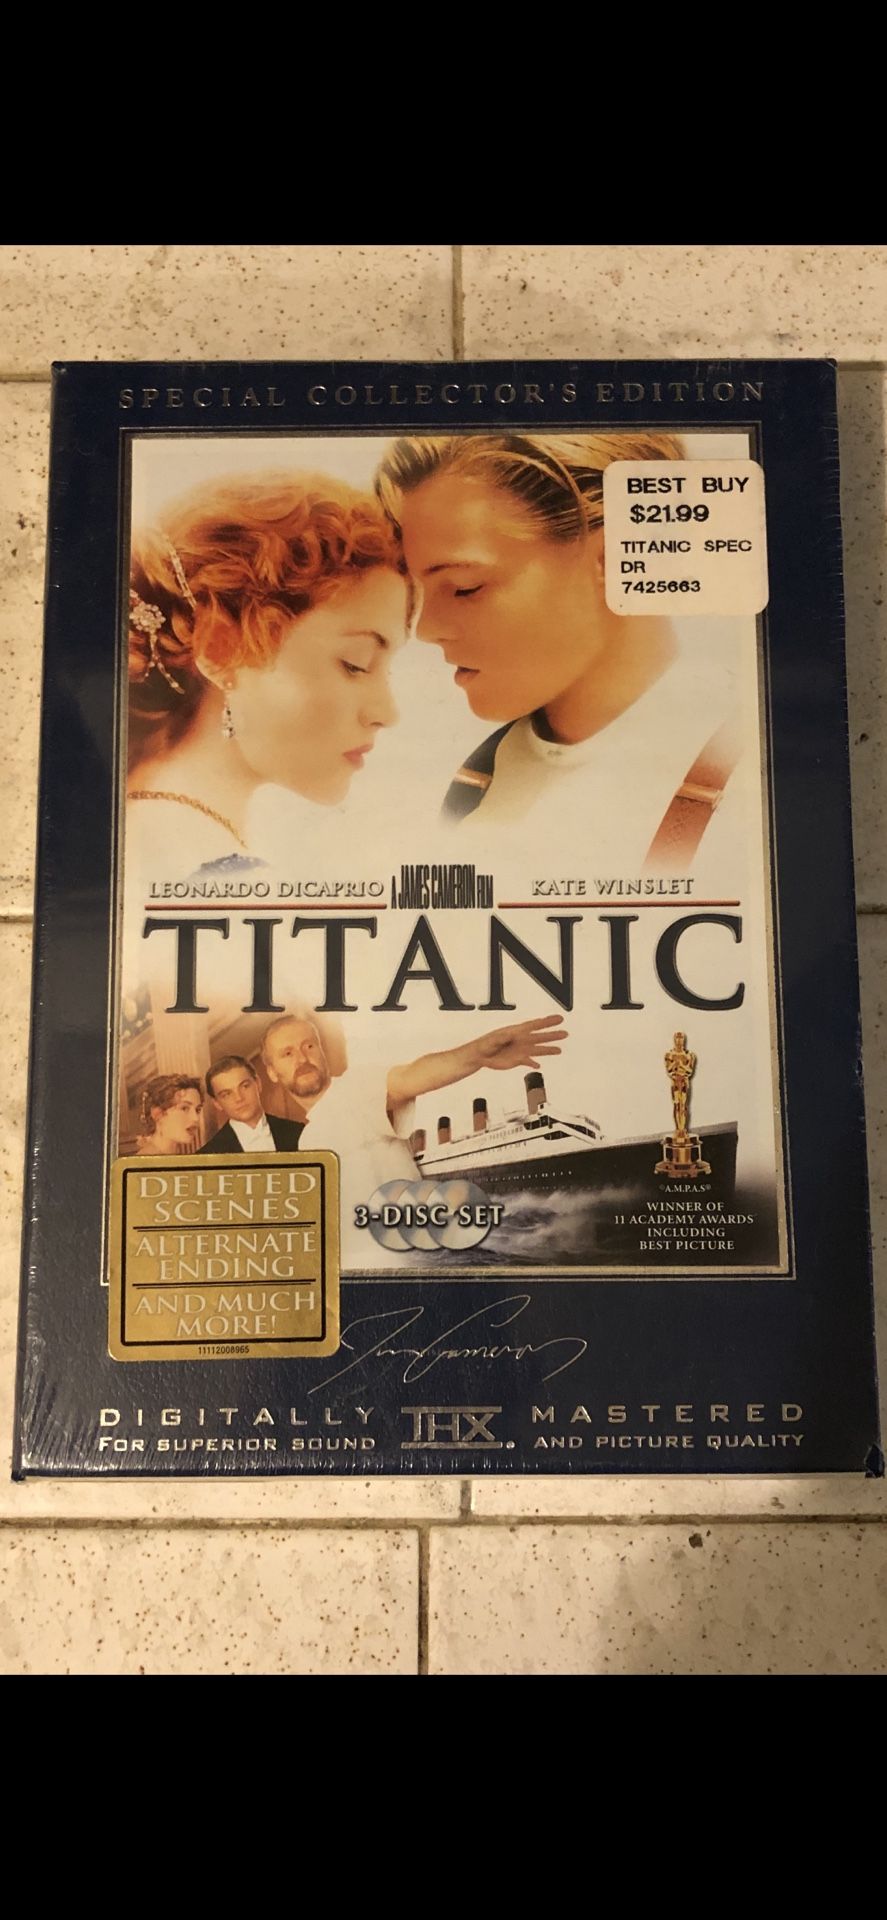 The Titanic Special Collectors Edition